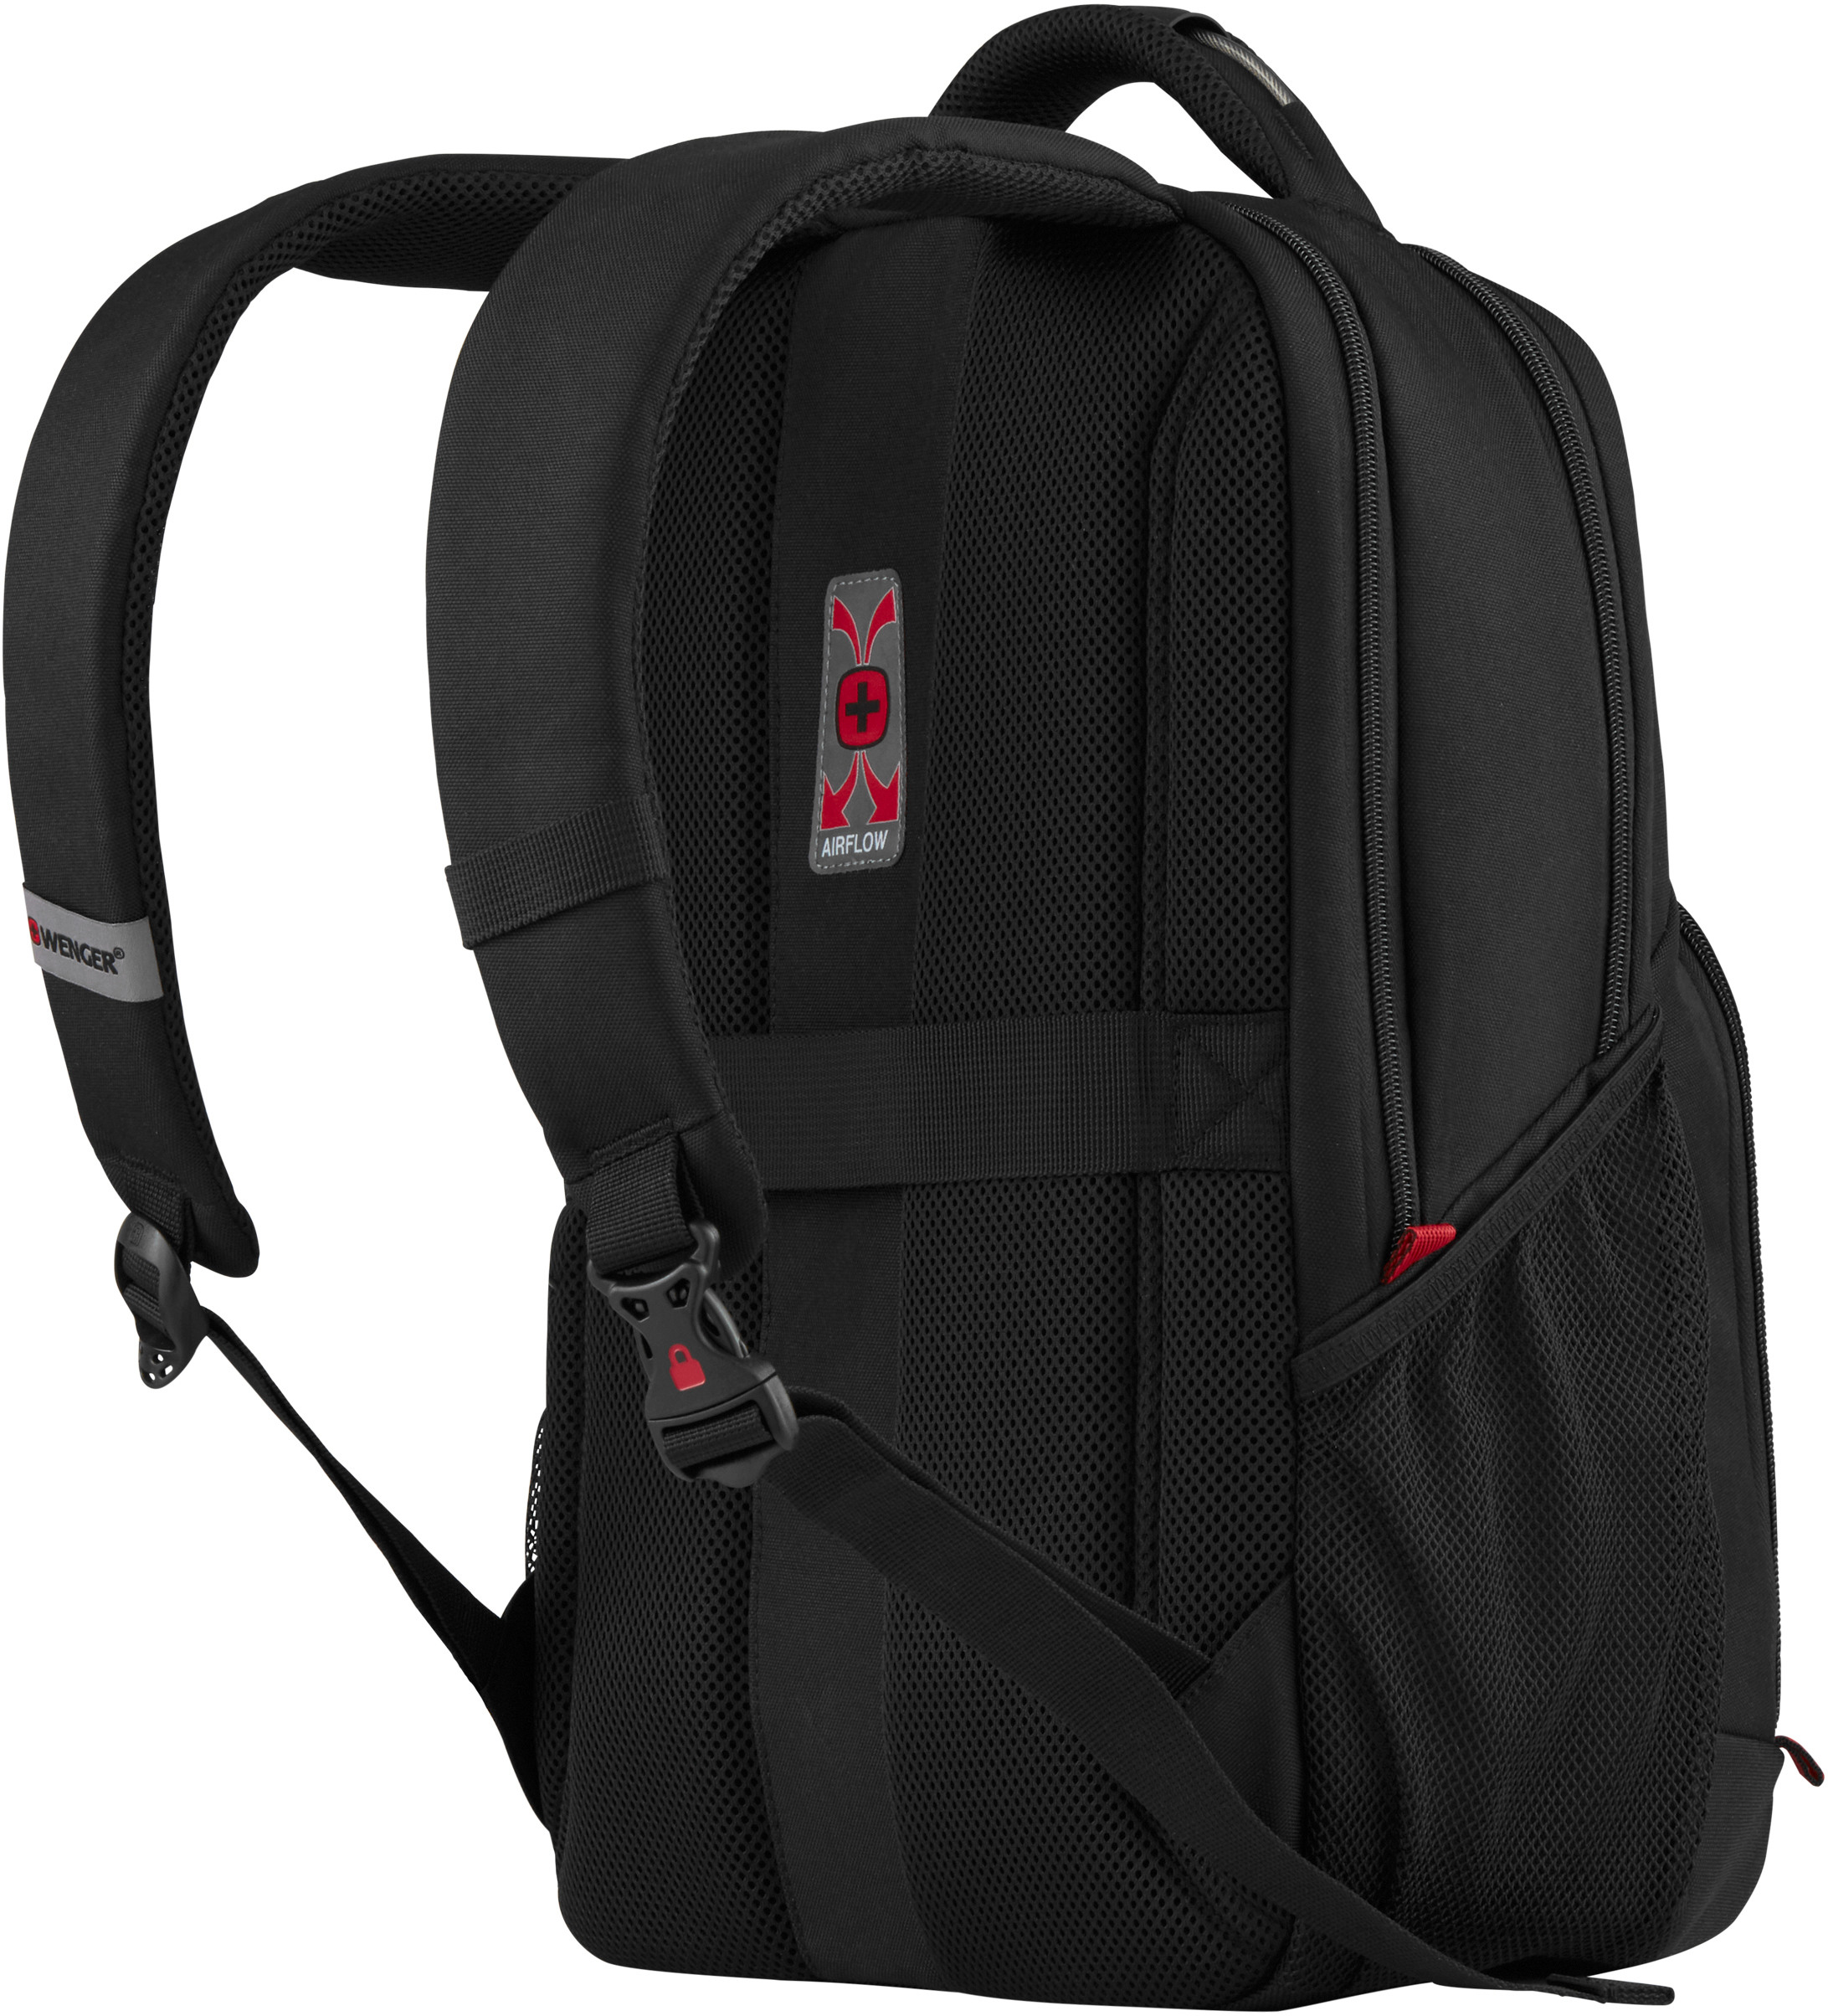 WENGER PlayerMode 14 inch 611651 Laptop Backpack